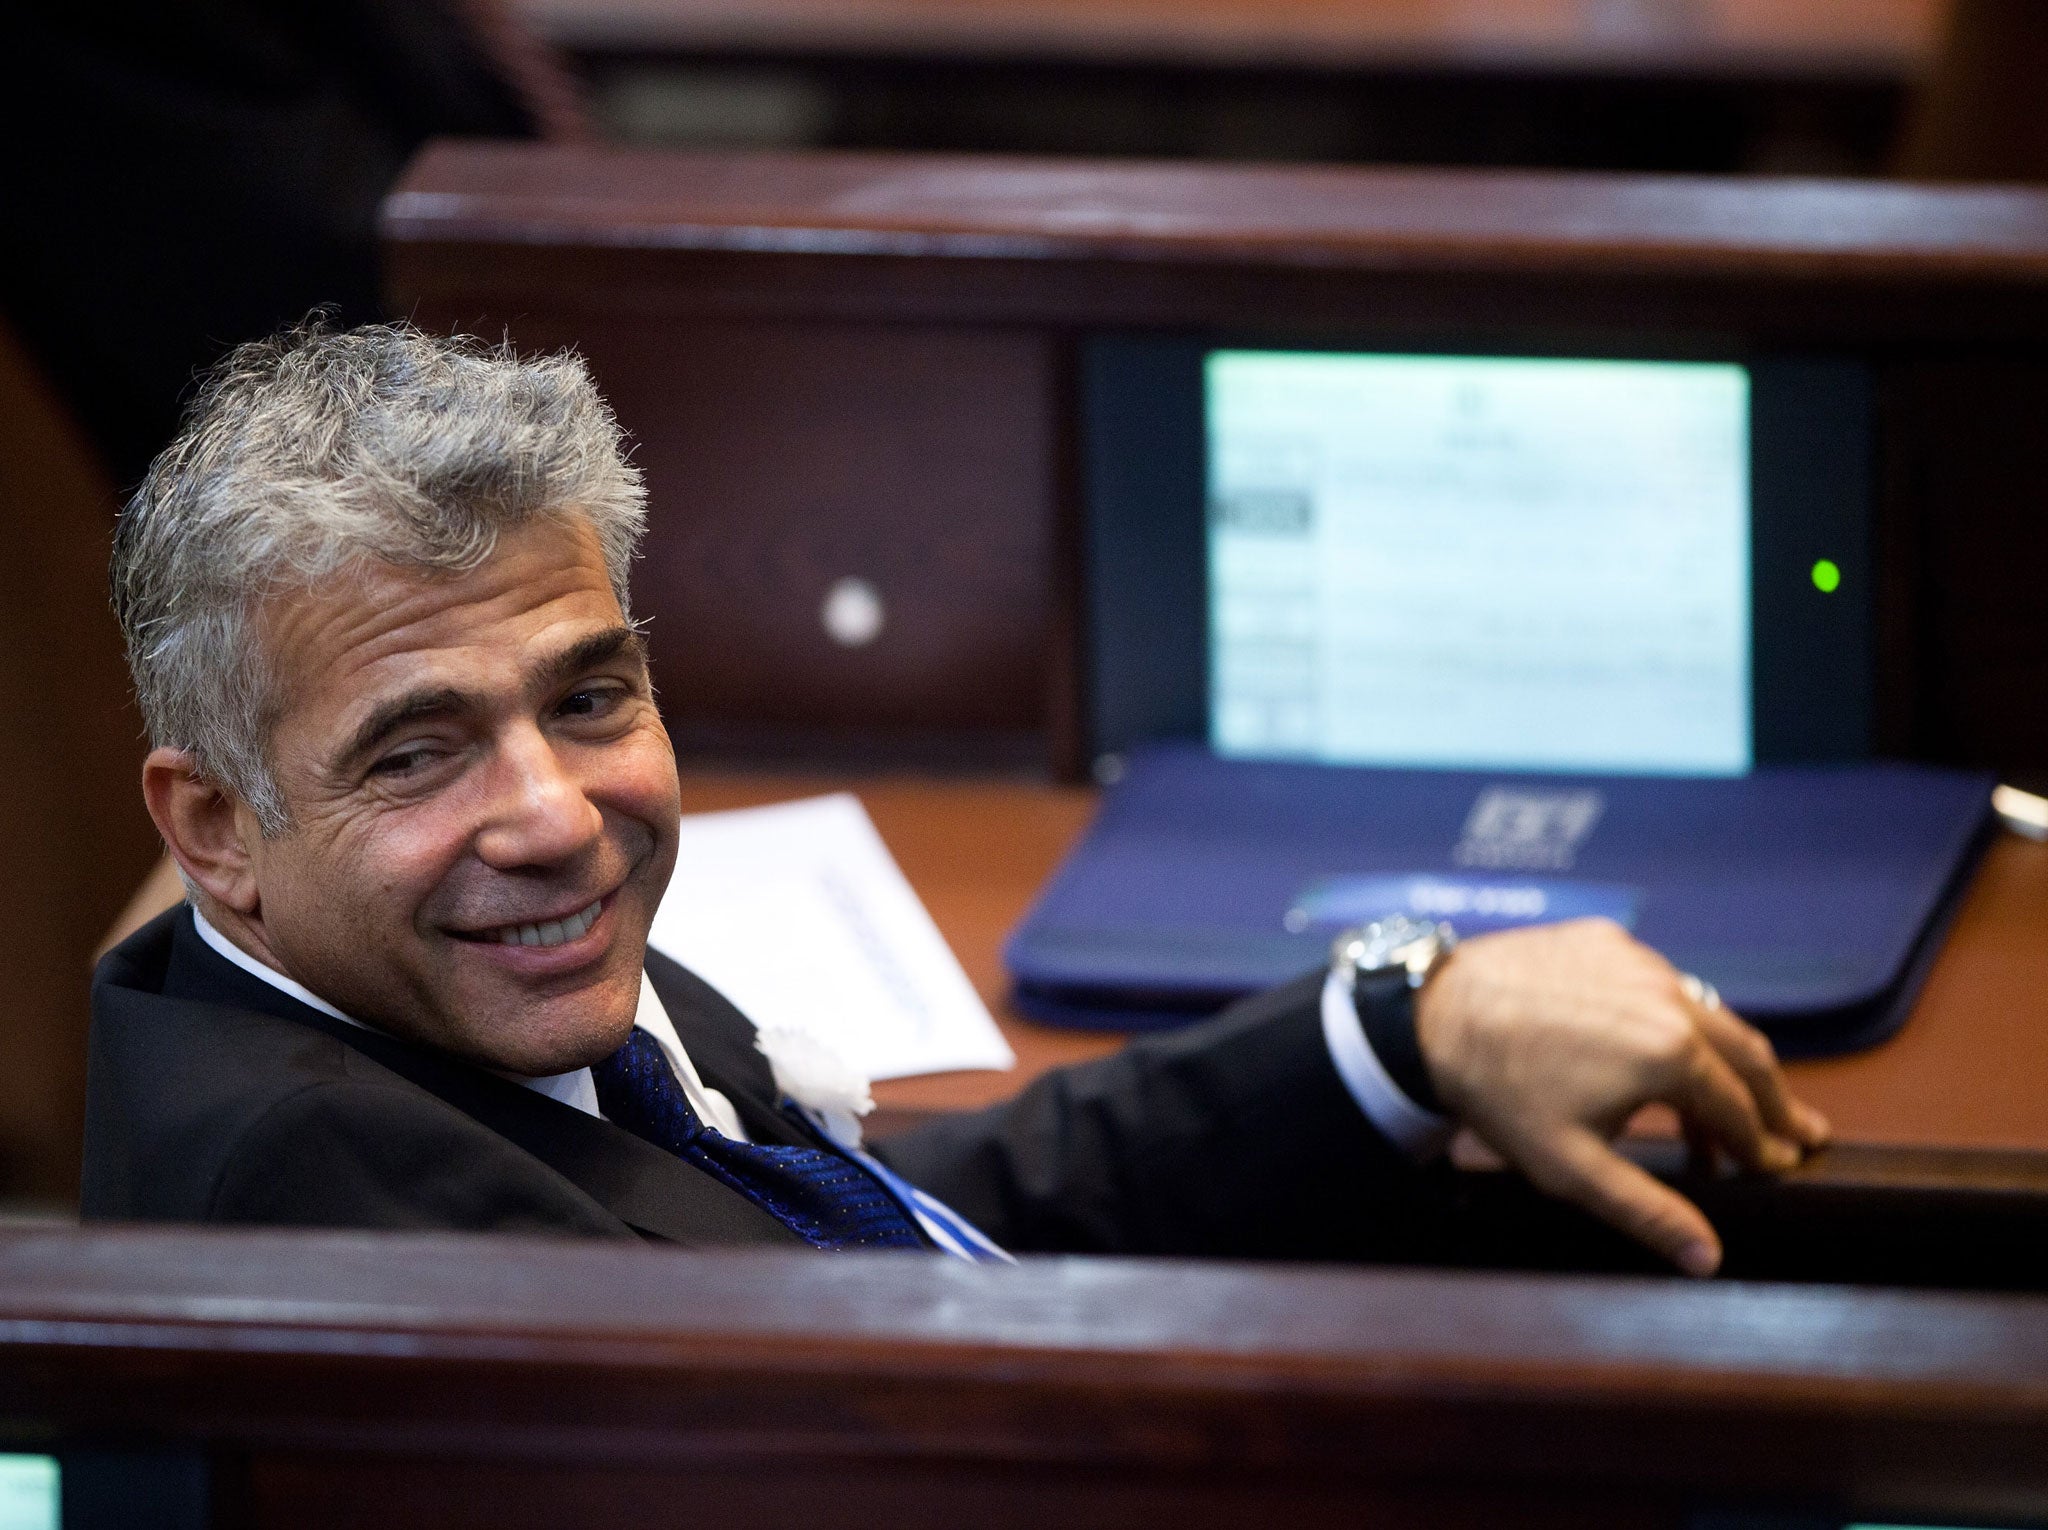 Yair Lapid leader of the Israeli Yesh Atid party attends the swearing-in ceremony of the 19th Knesset, the new Israeli parliament, on February 5, 2013 in Jerusalem, Israel.